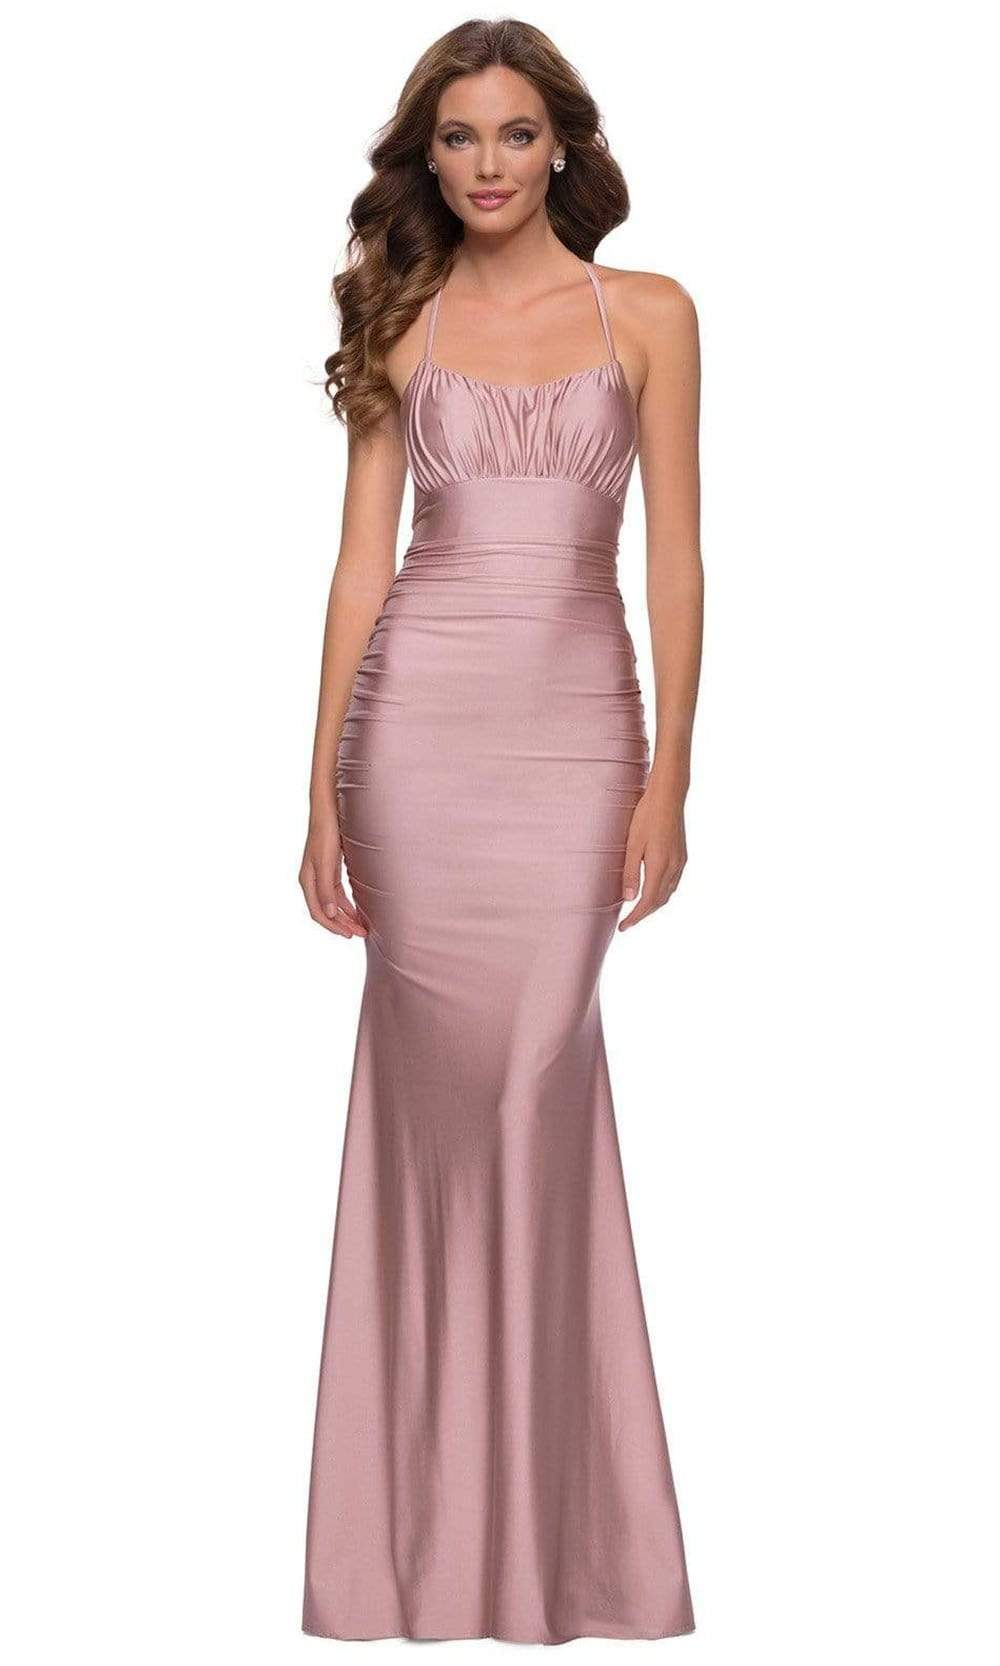 La Femme - 29873 Strappy Open Back Shiny Jersey Fitted Gown Prom Dresses 00 / Mauve